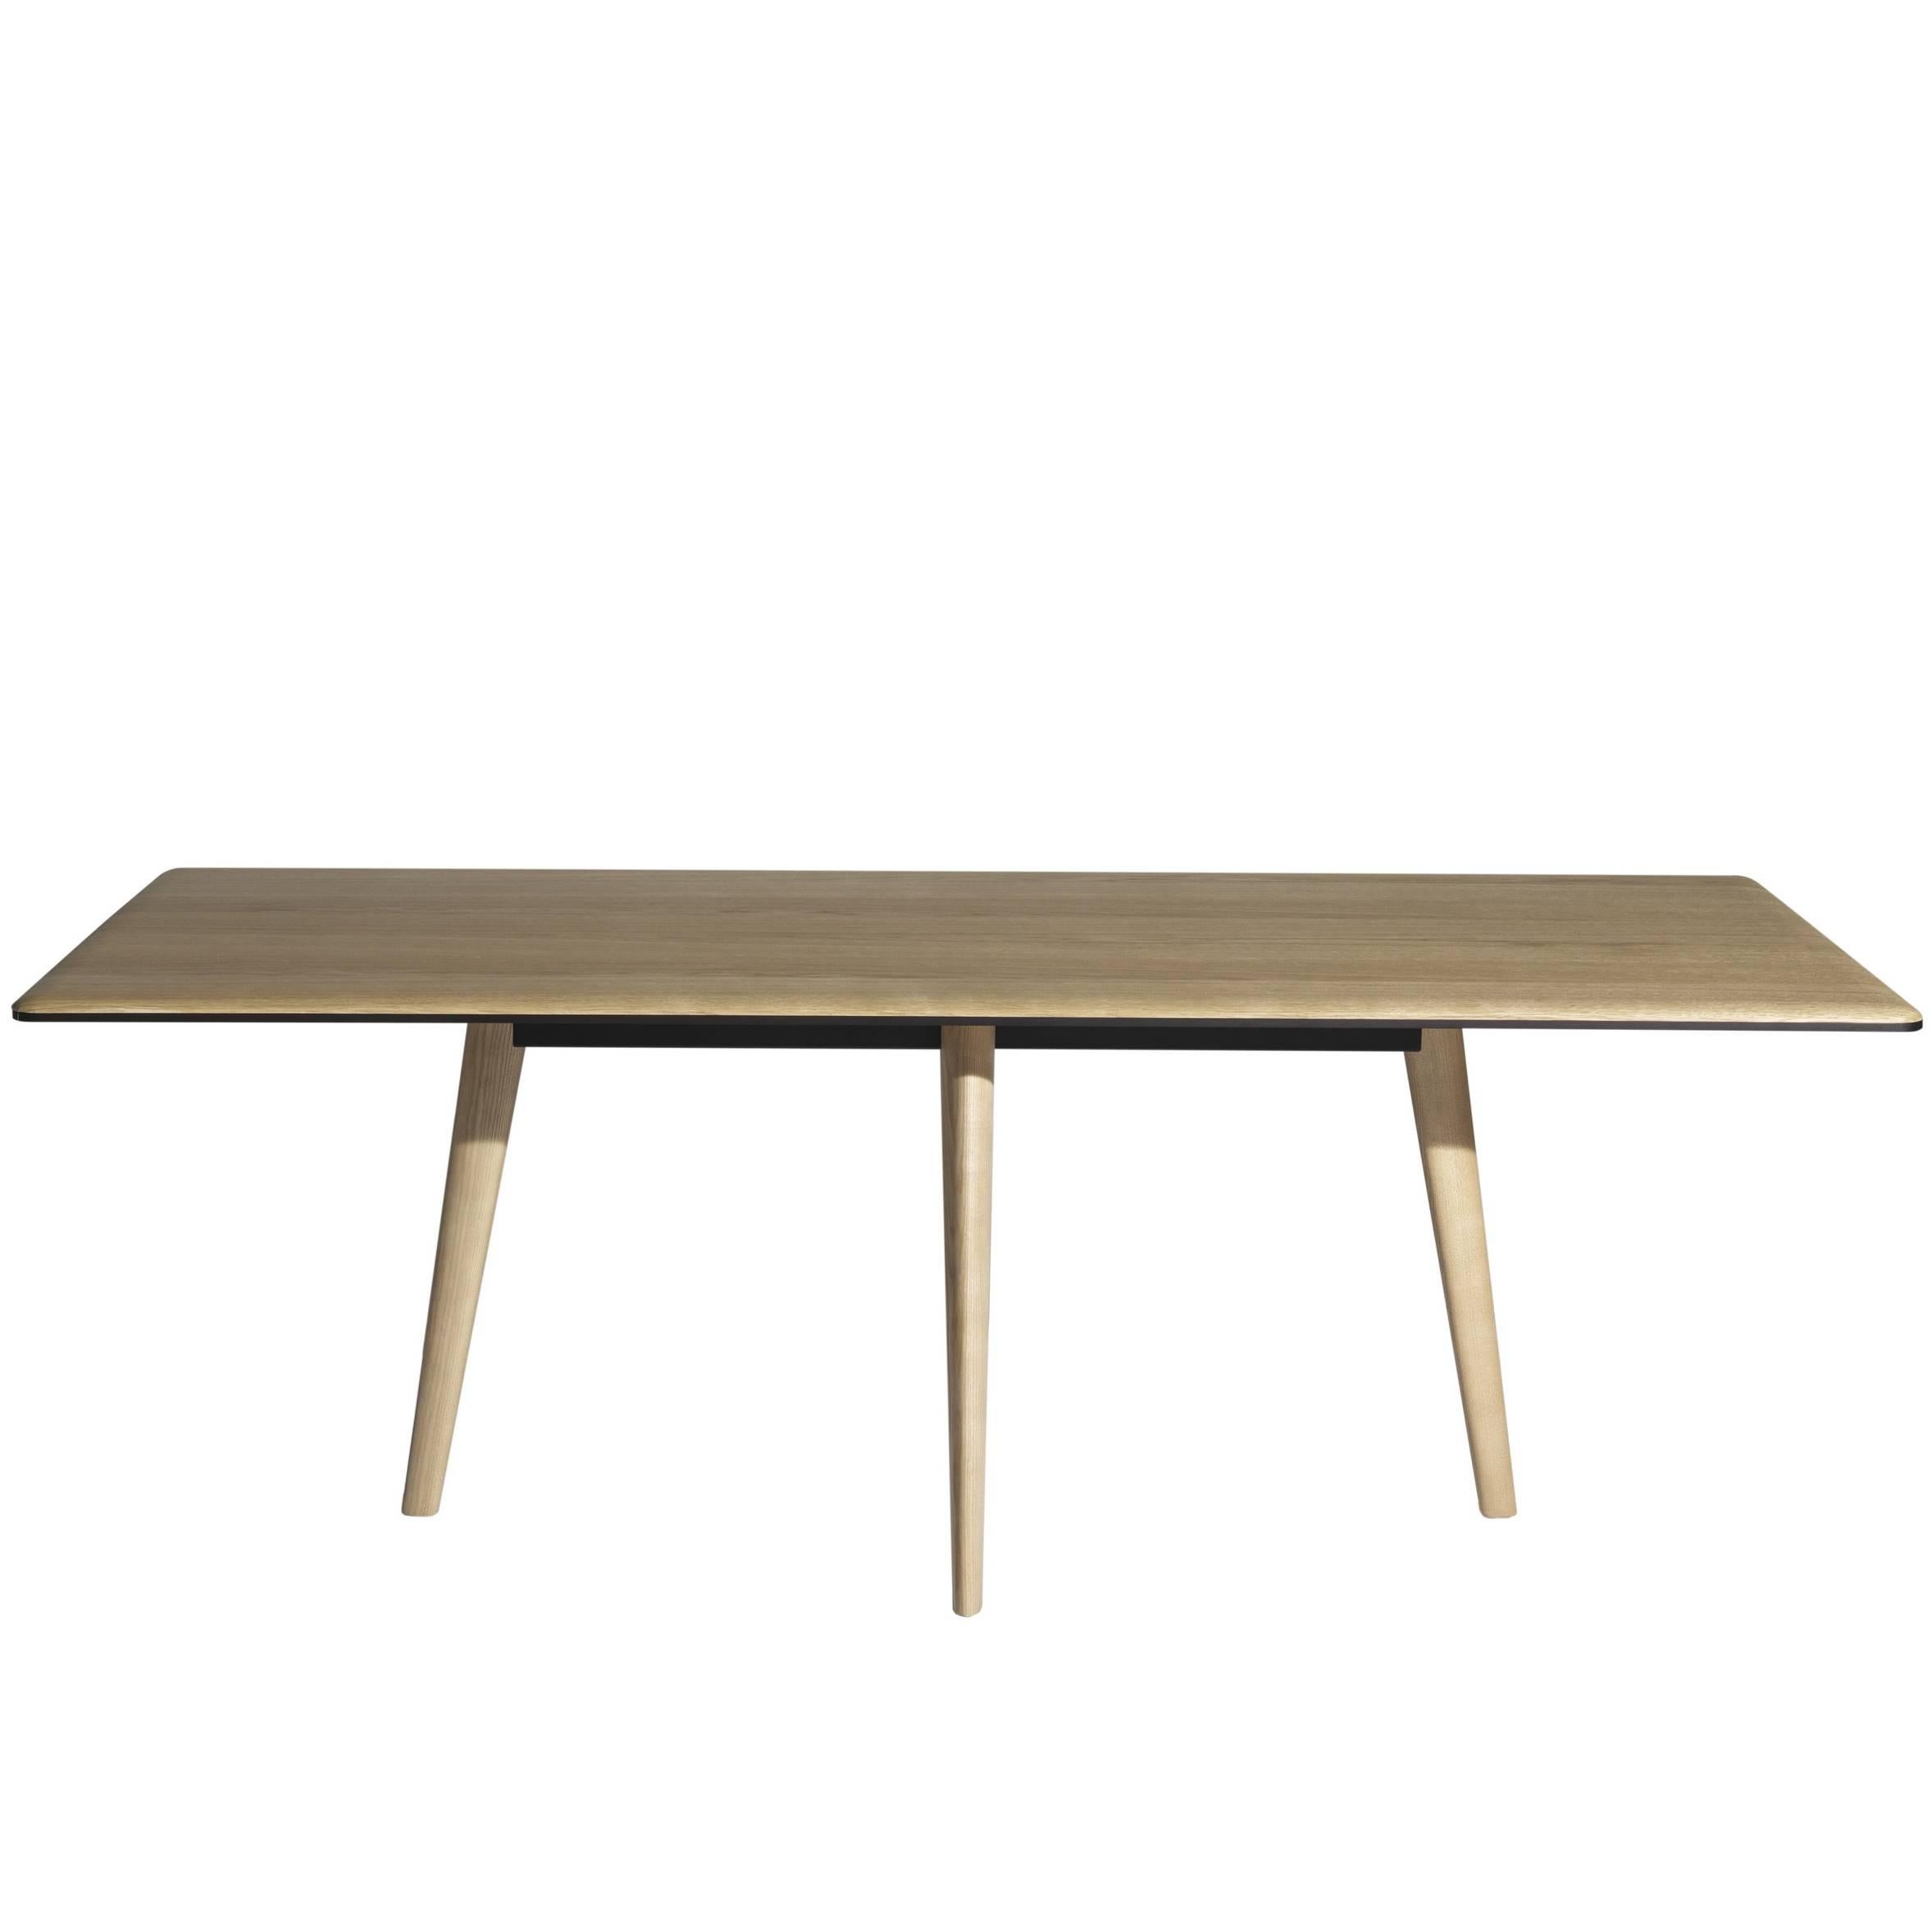 "François" Natural or Ebonized Oak Top Table by Lievore Altherr for Driade